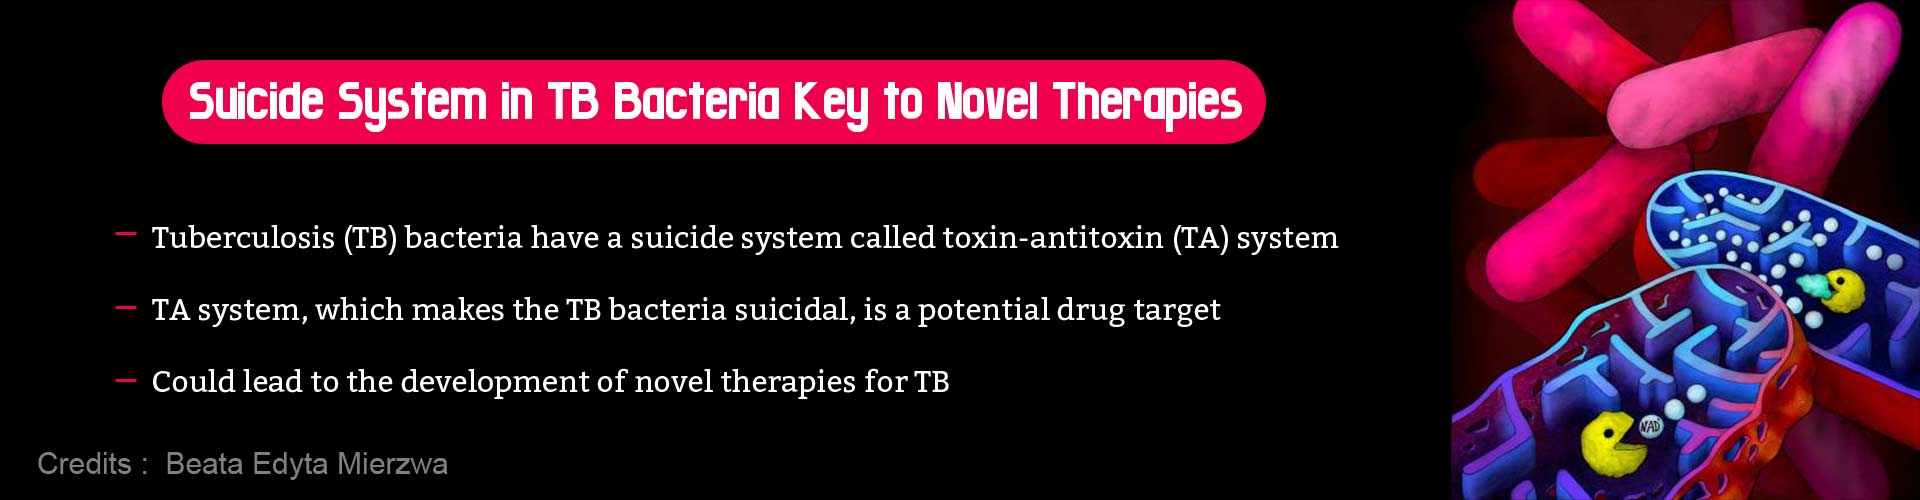 Suicide system in TB bacteria key to novel therapies. Tuberculosis (TB) bacteria have a suicide system called toxin-antitoxin (TA) system. TA system, which makes the TB bacteria suicidal, is a potential drug target. Could lead to the development of novel therapies for TB.